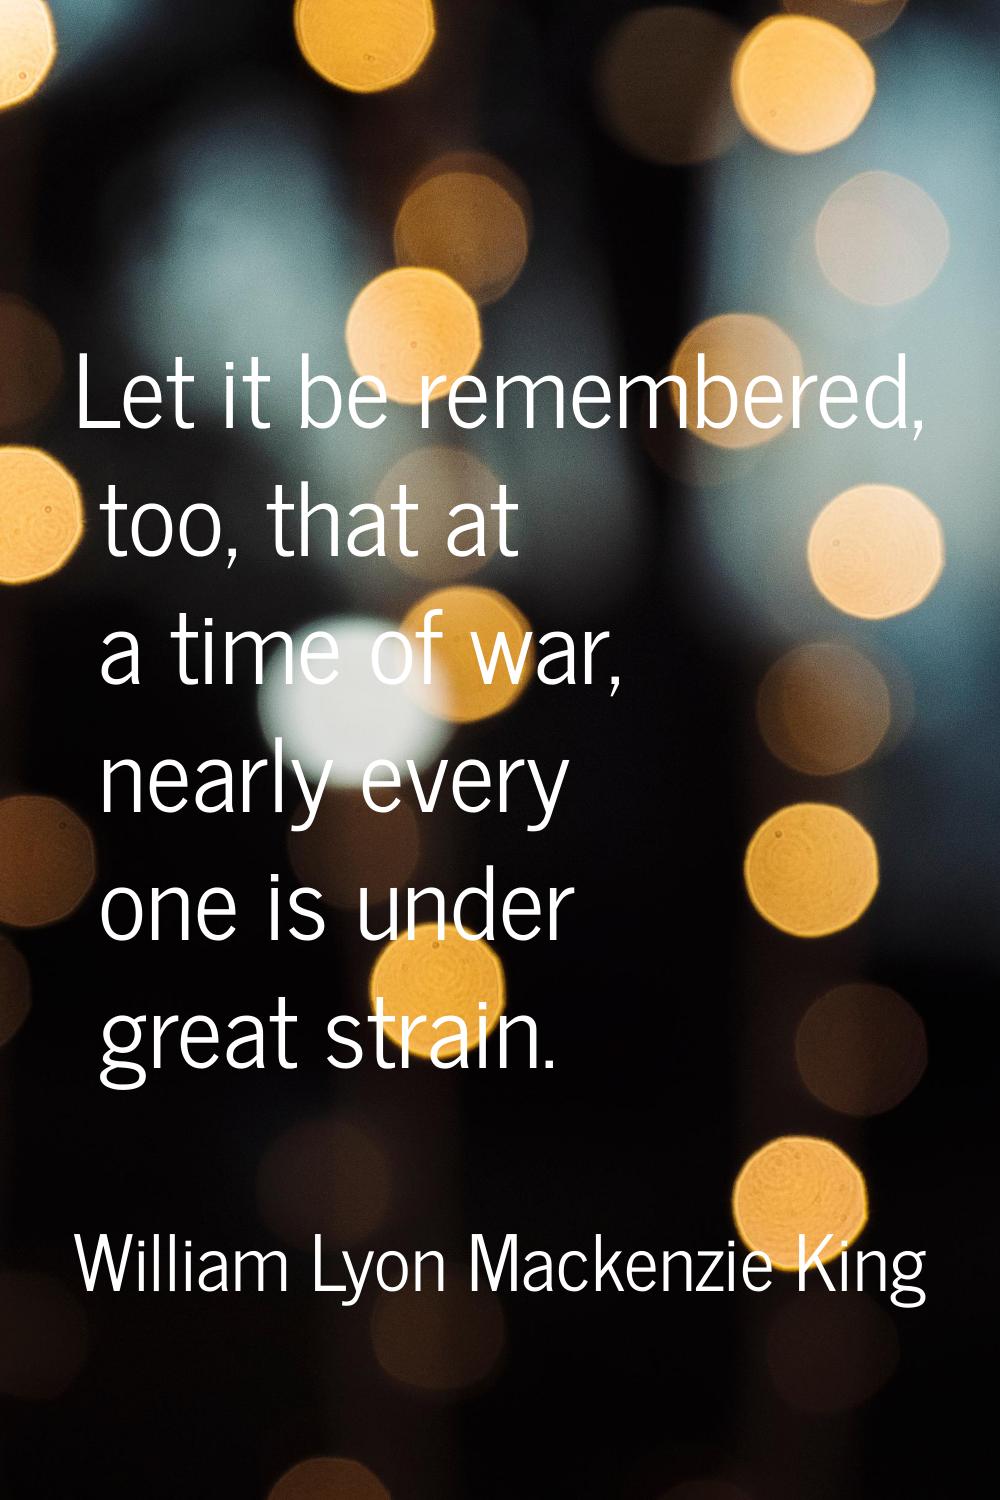 Let it be remembered, too, that at a time of war, nearly every one is under great strain.